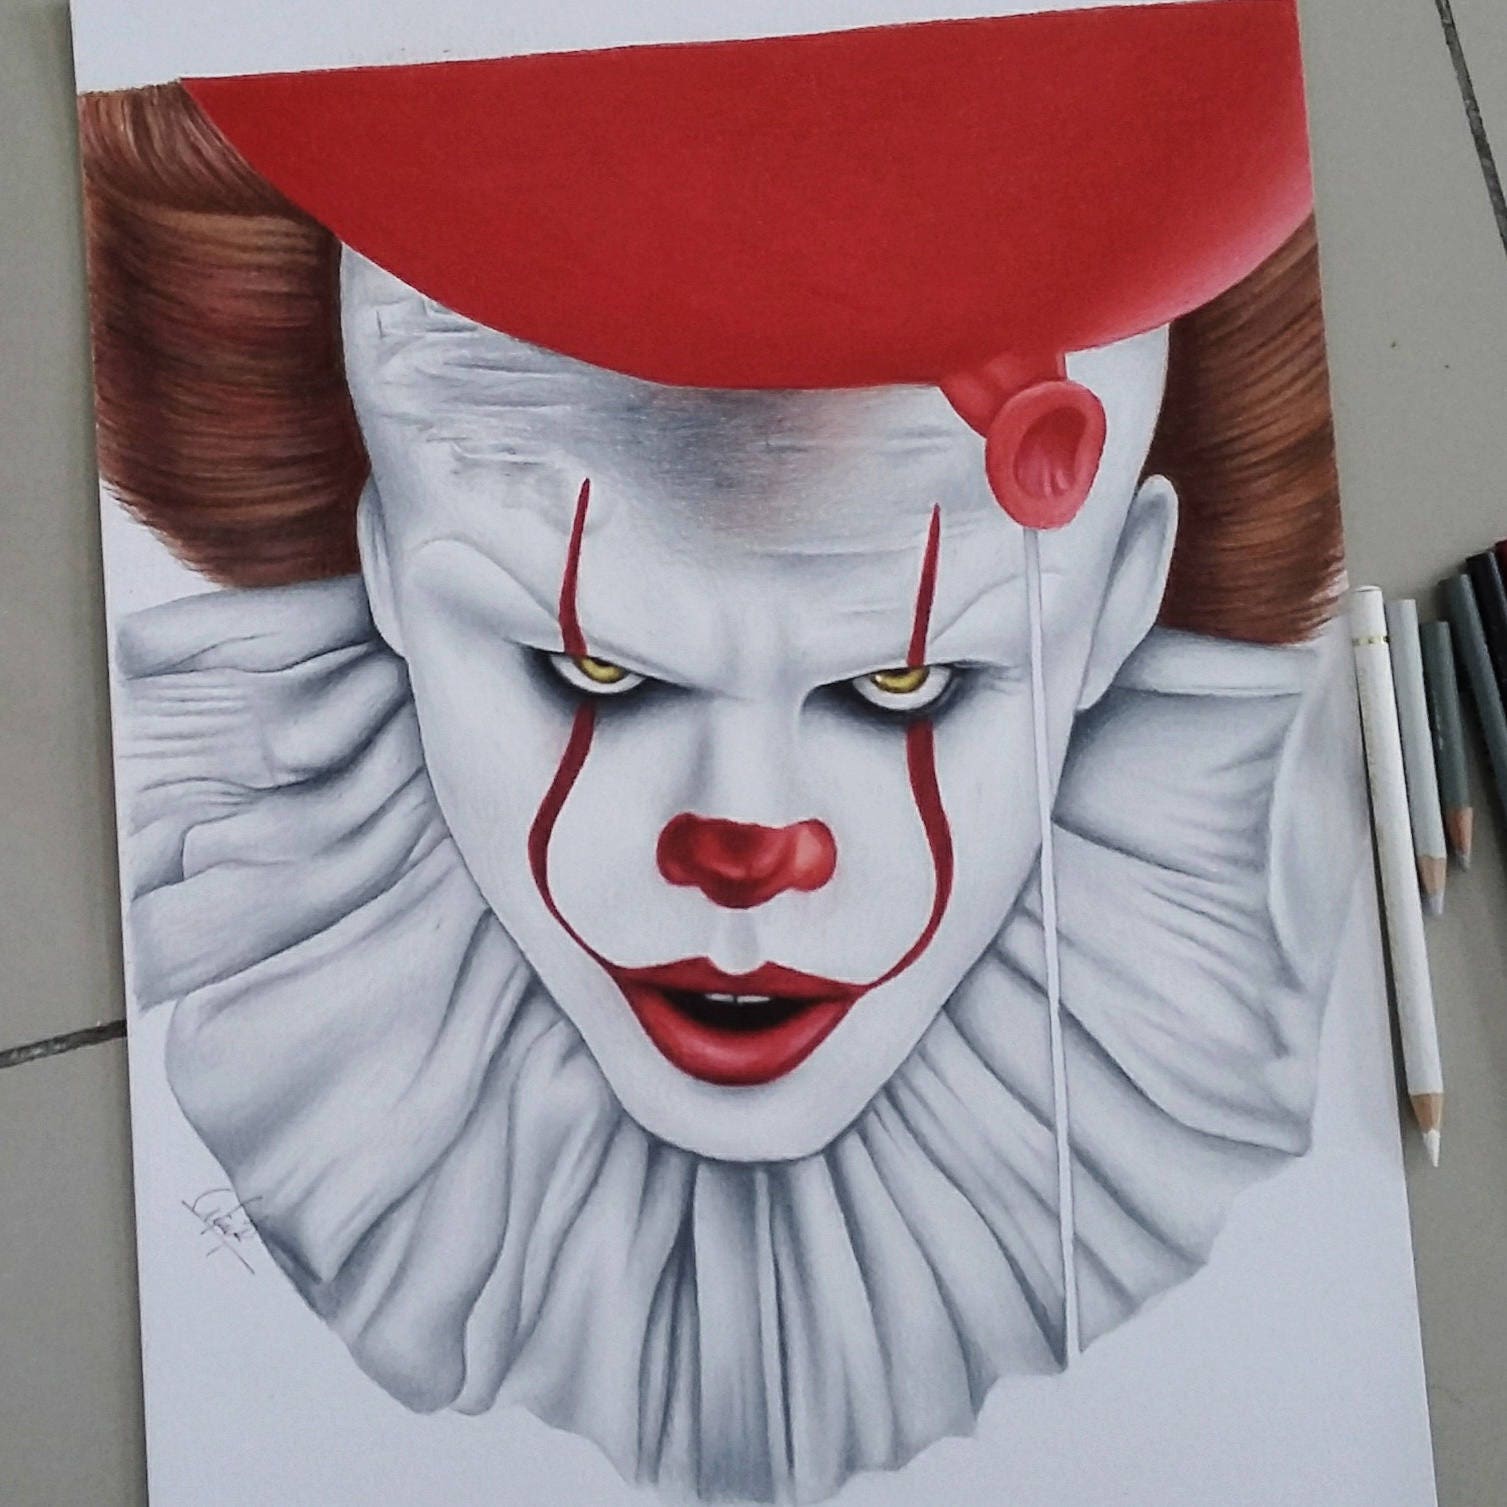 Top How To Draw Pennywise 2017 of all time Learn more here 